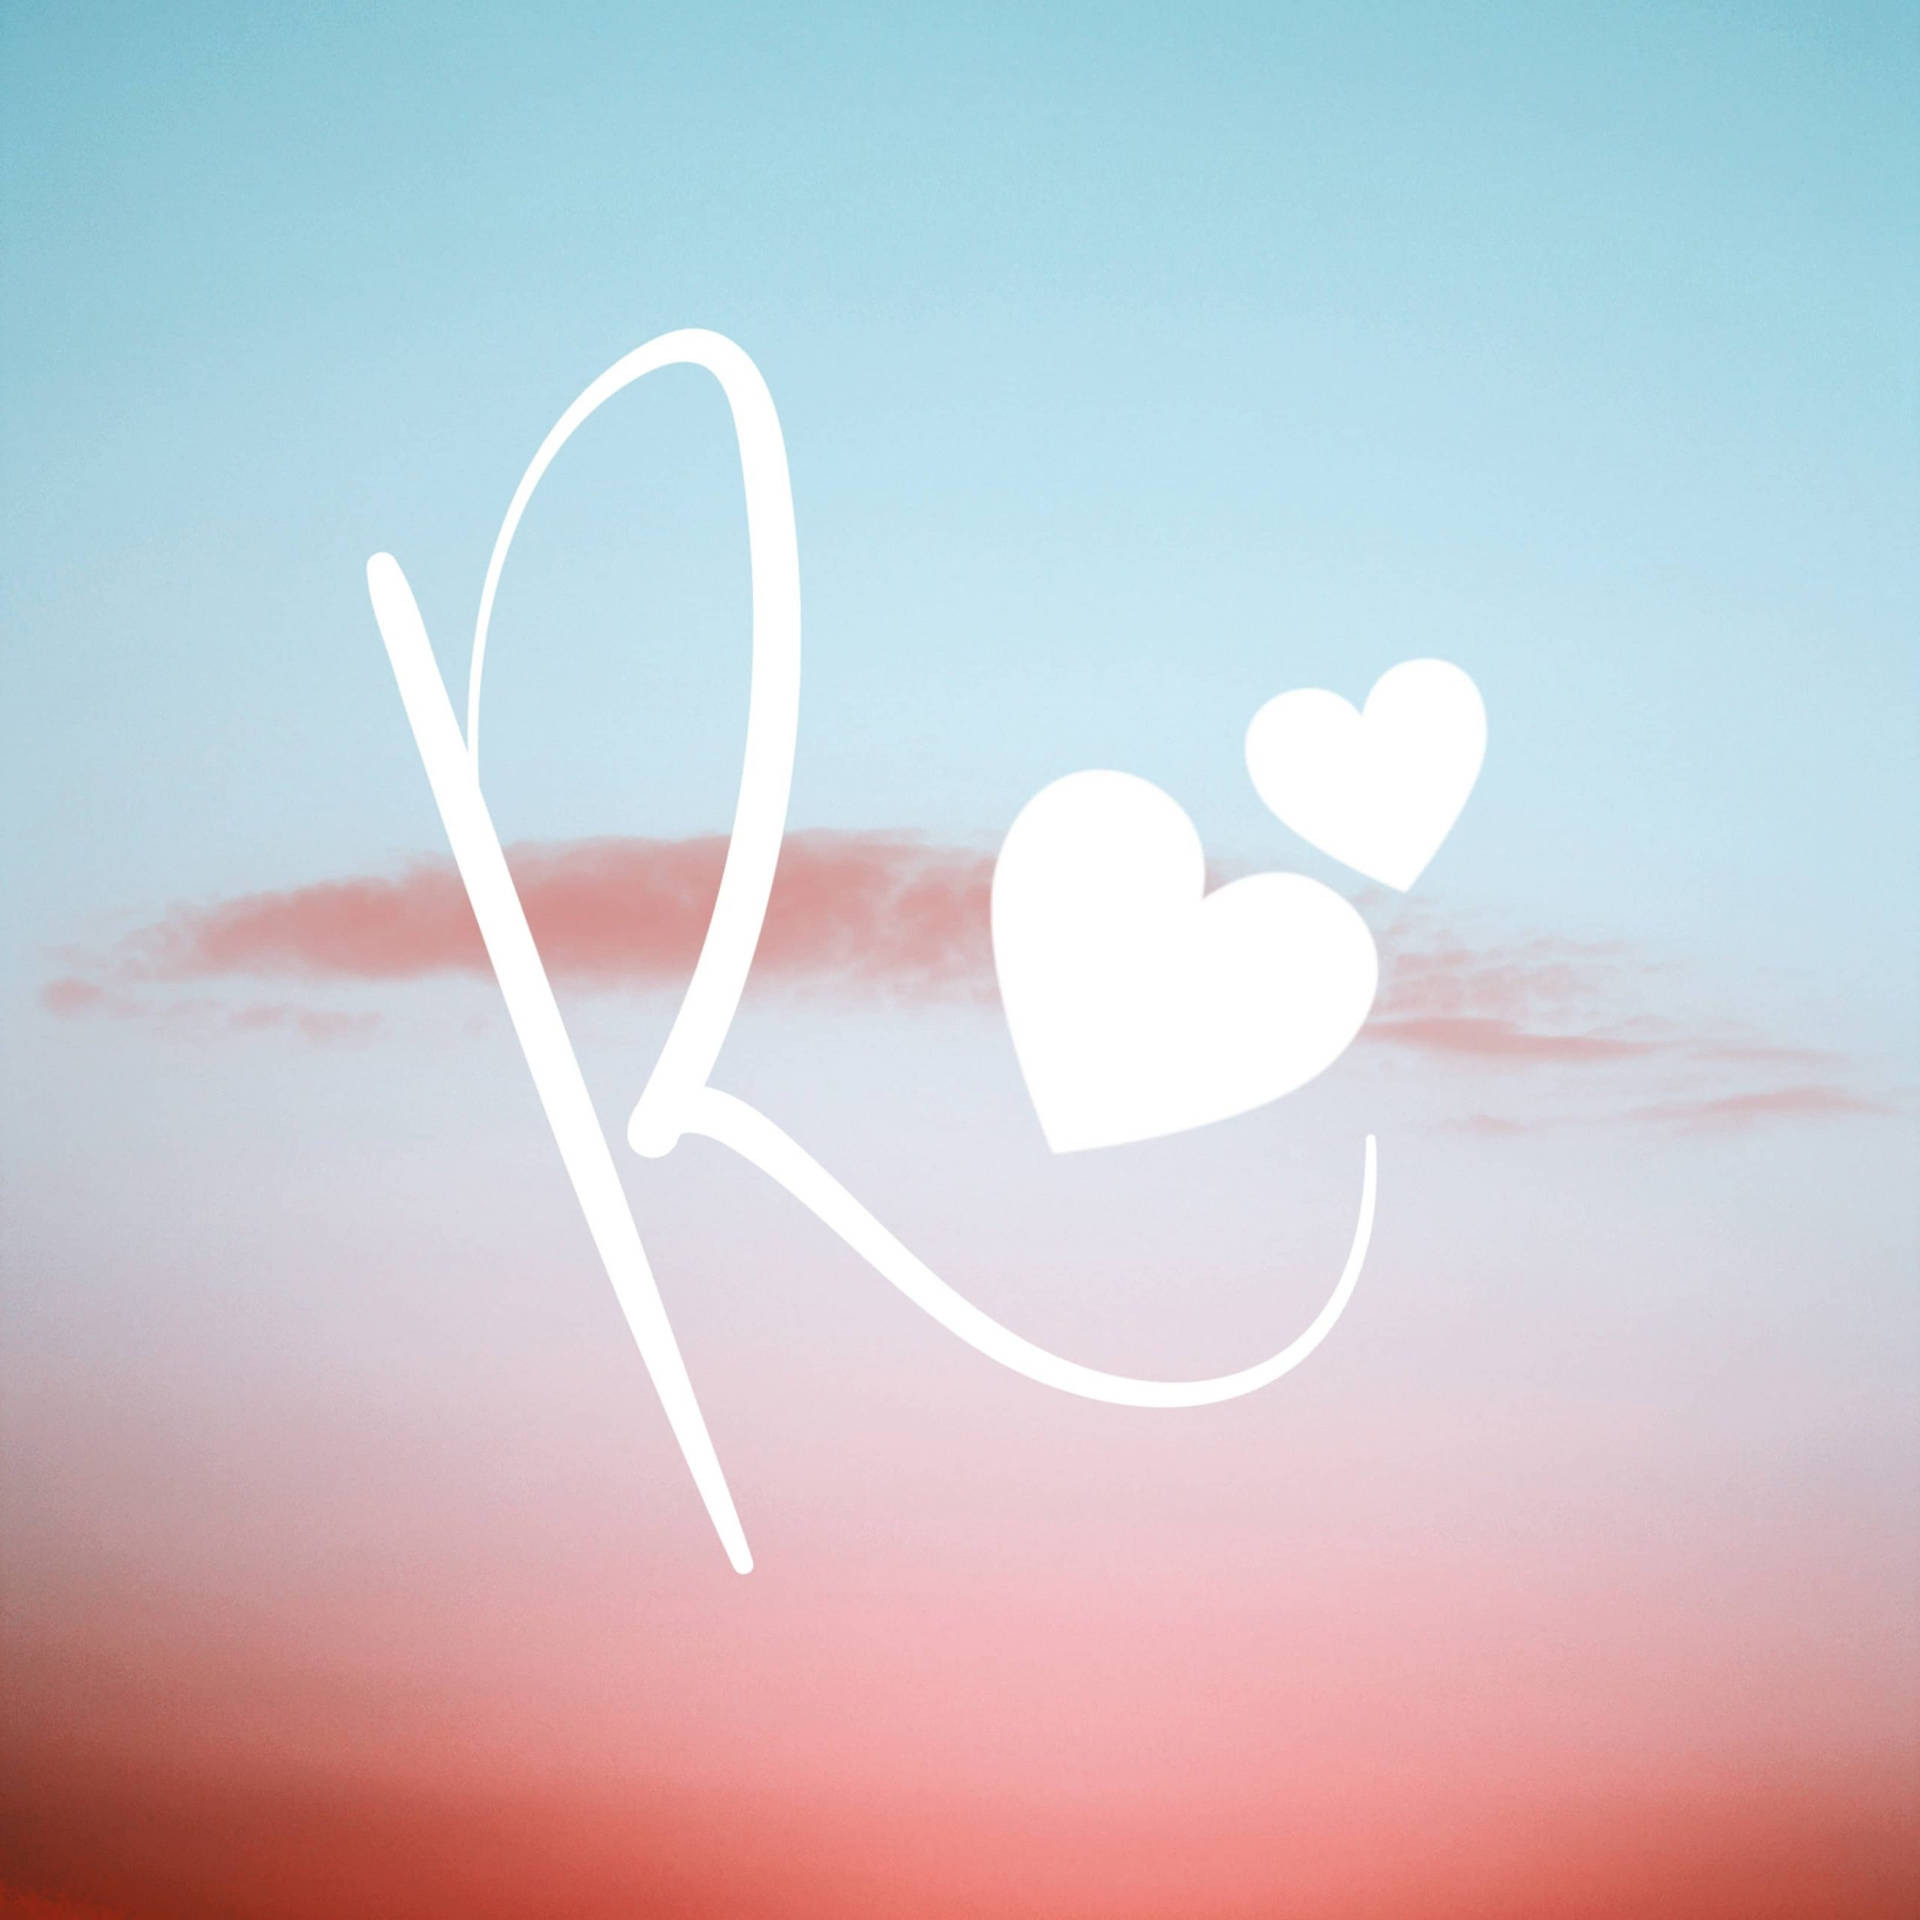 Free Letter R Wallpaper Downloads, [100+] Letter R Wallpapers for FREE |  